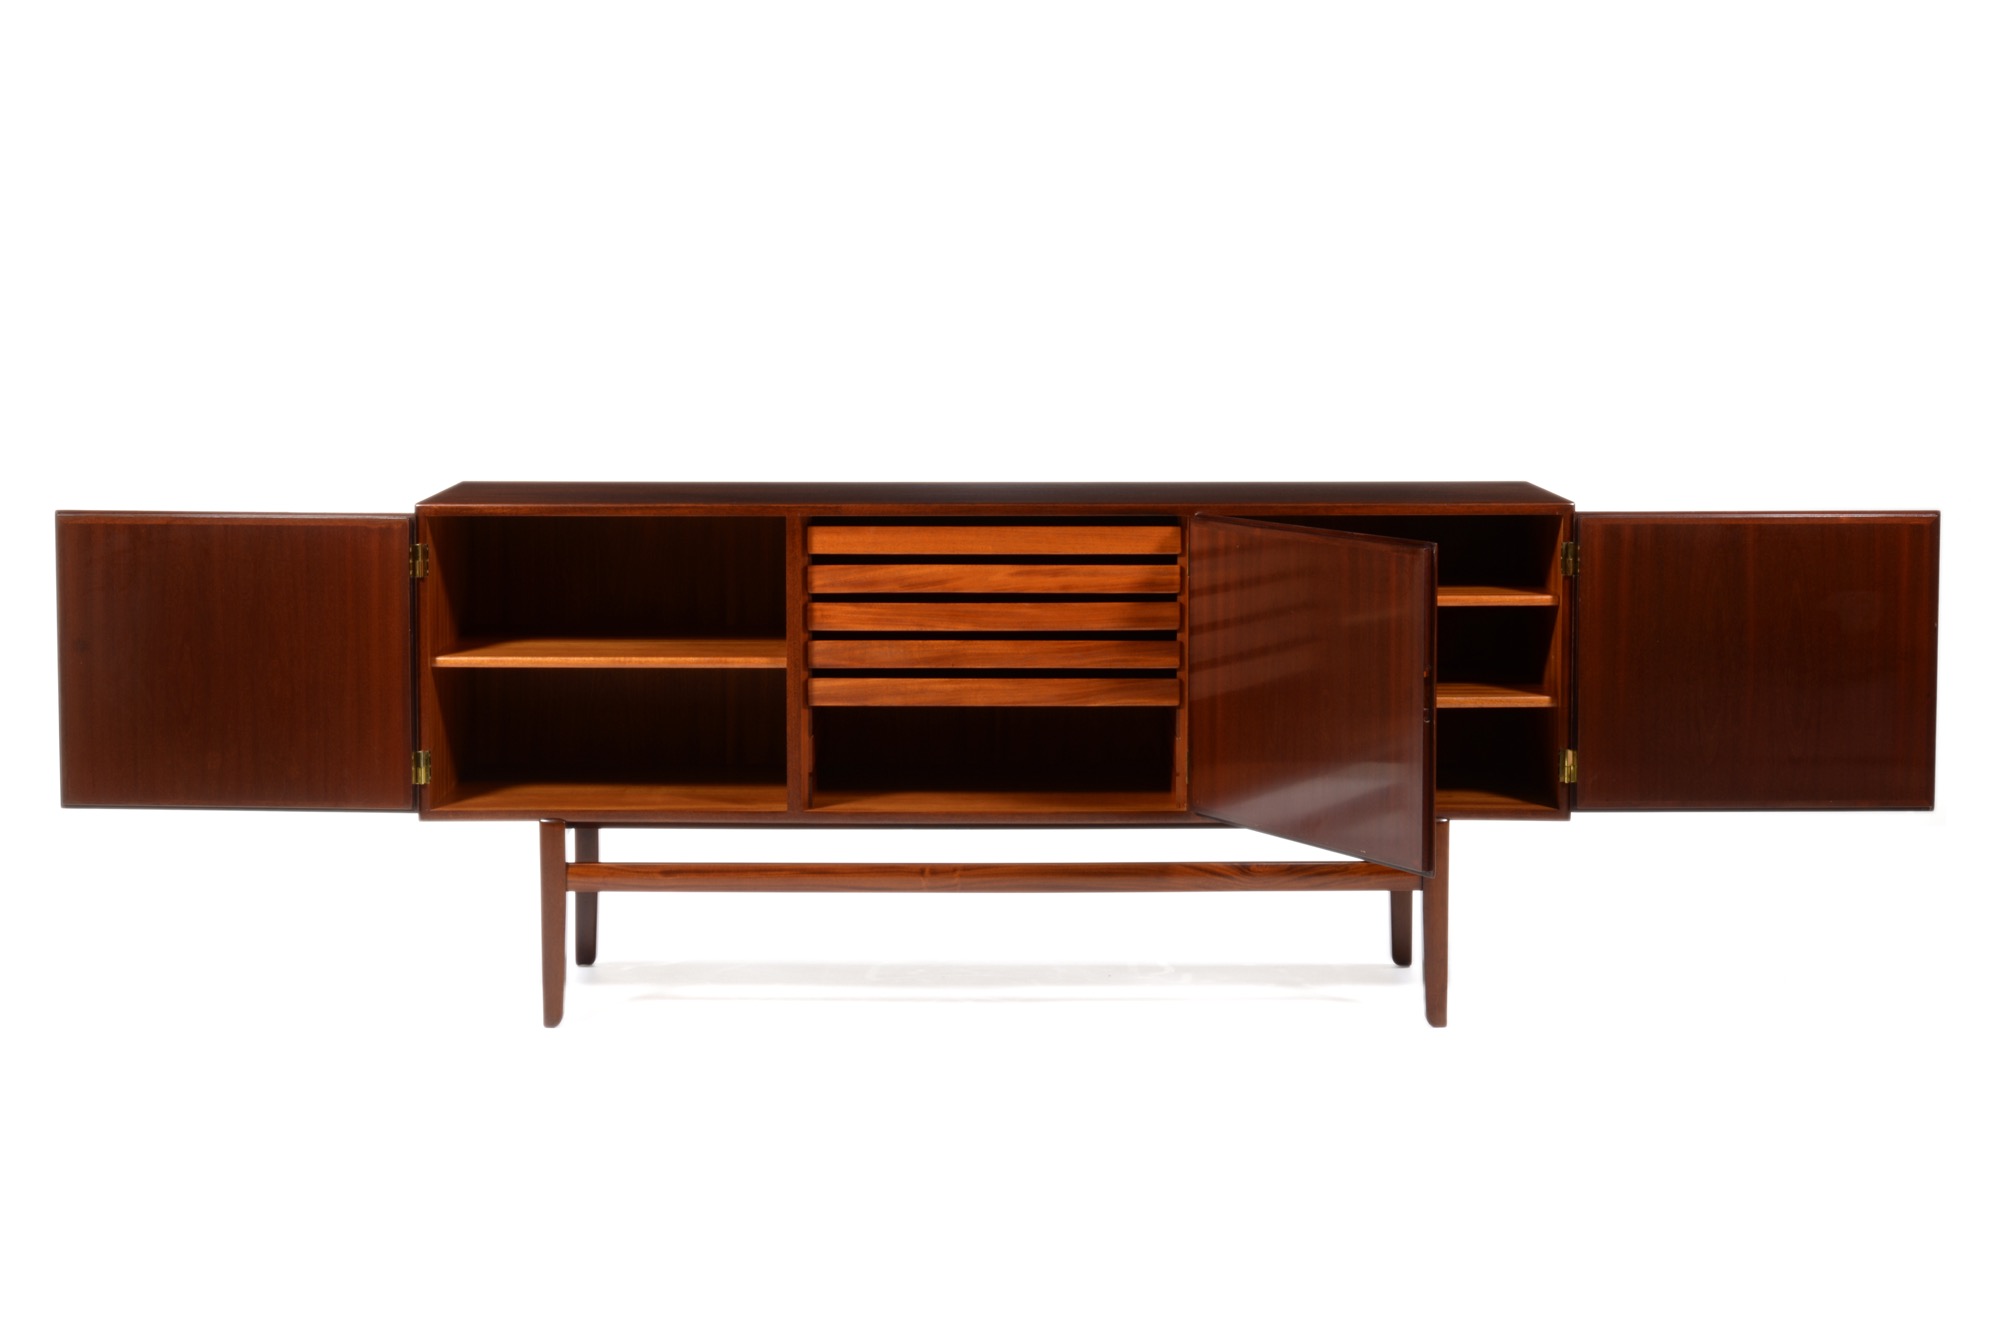 Ole Wanscher “Rungstedlund” Sideboard cabinet in Mahogany｜Luca 